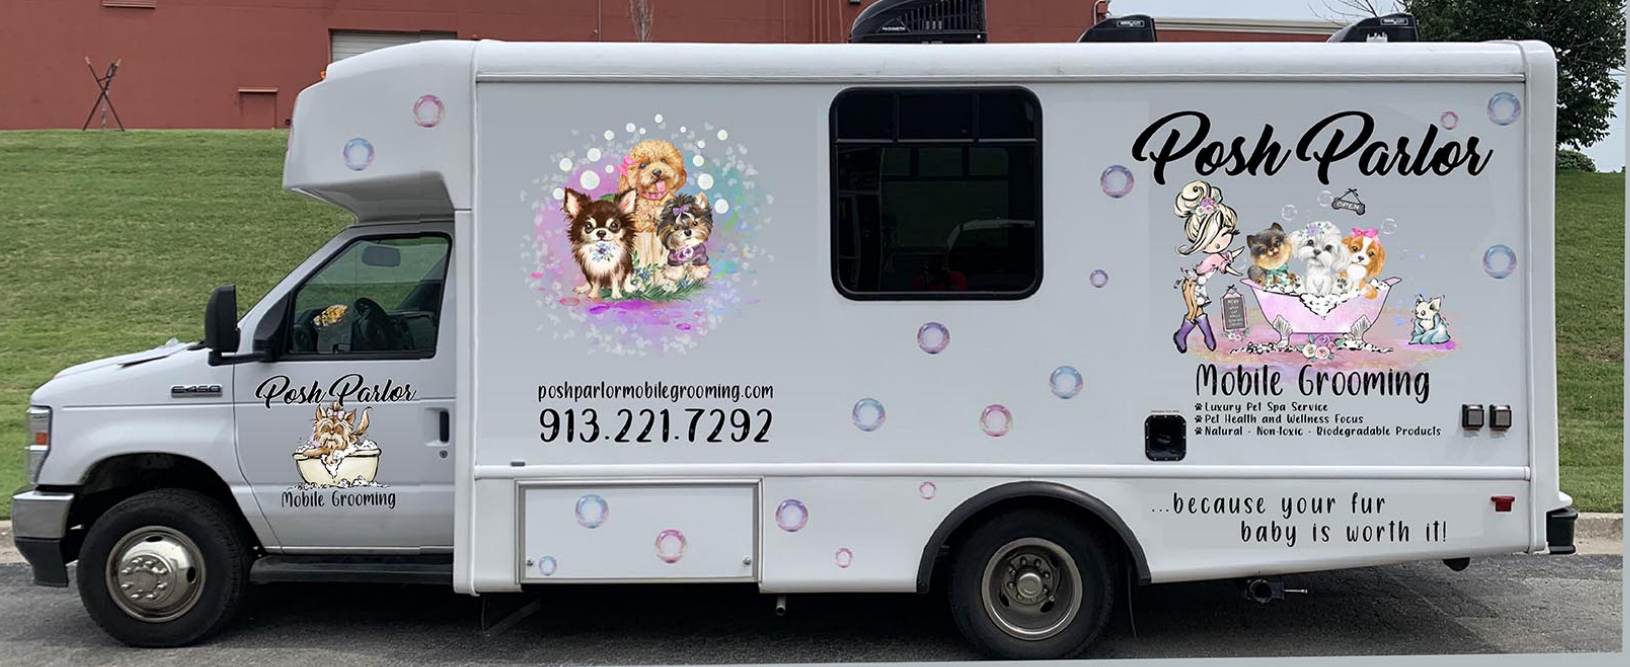 A white food truck with bubbles on the side.